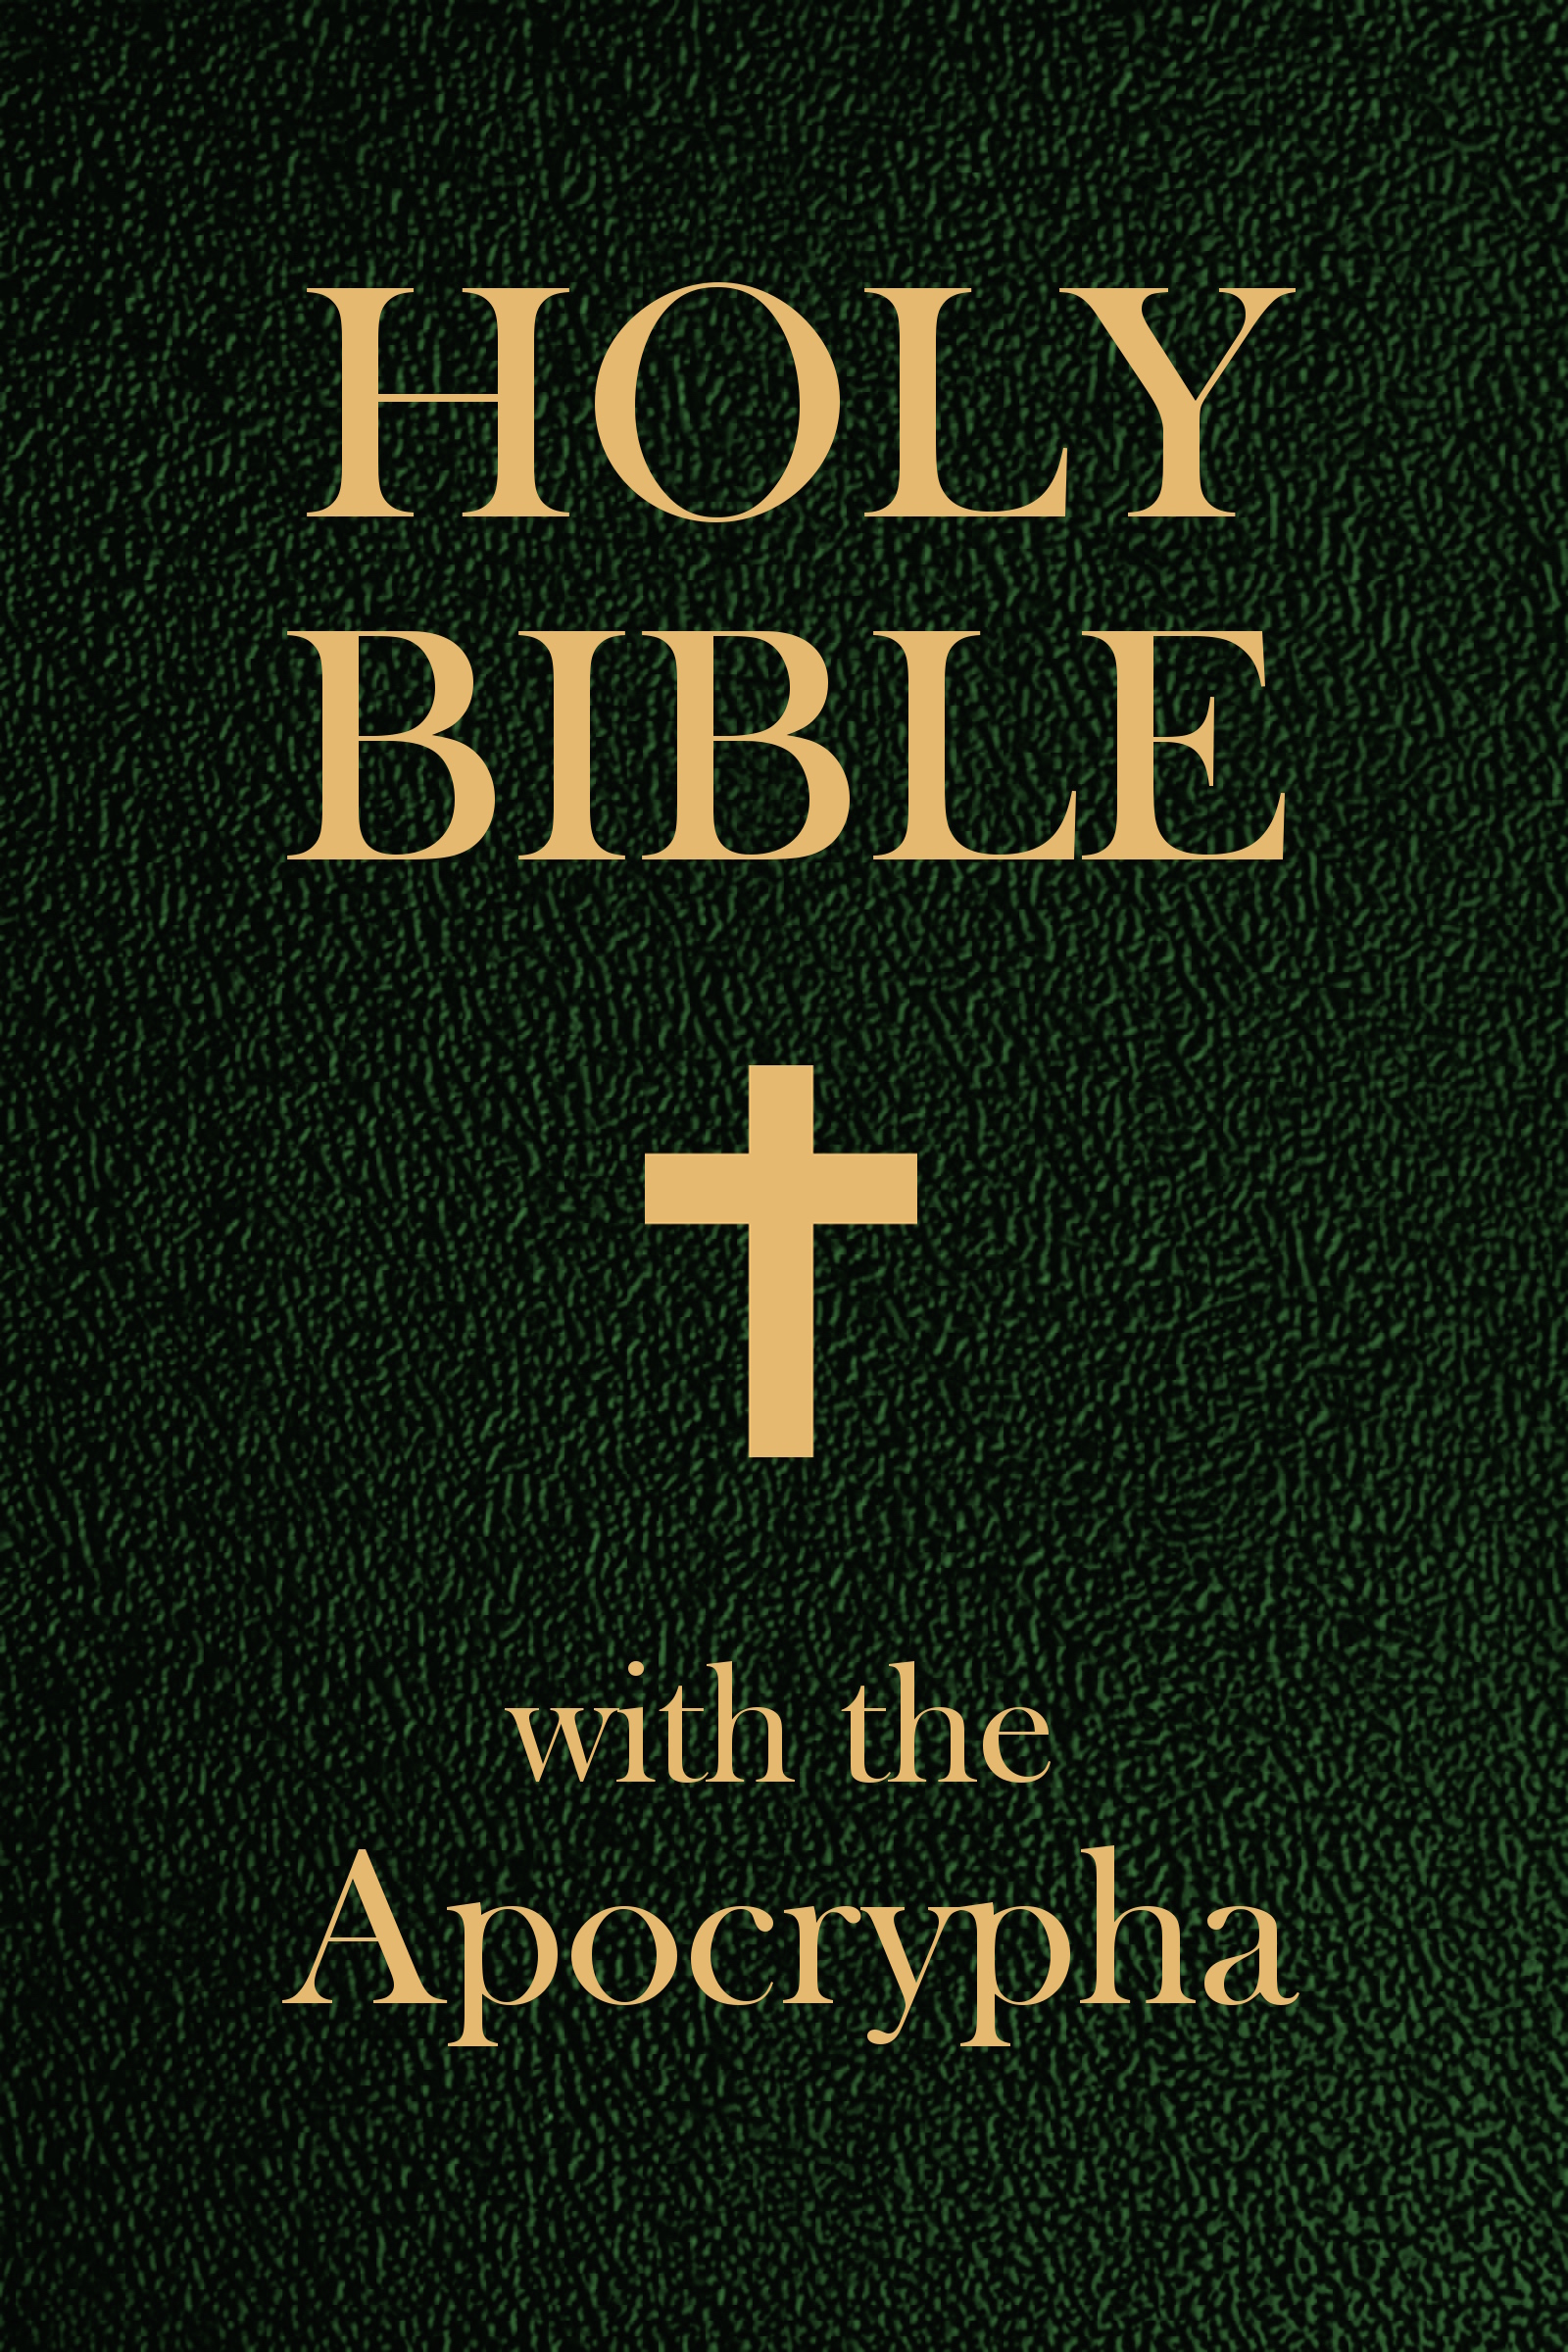 what-are-the-apocryphal-books-and-do-they-belong-in-the-bible